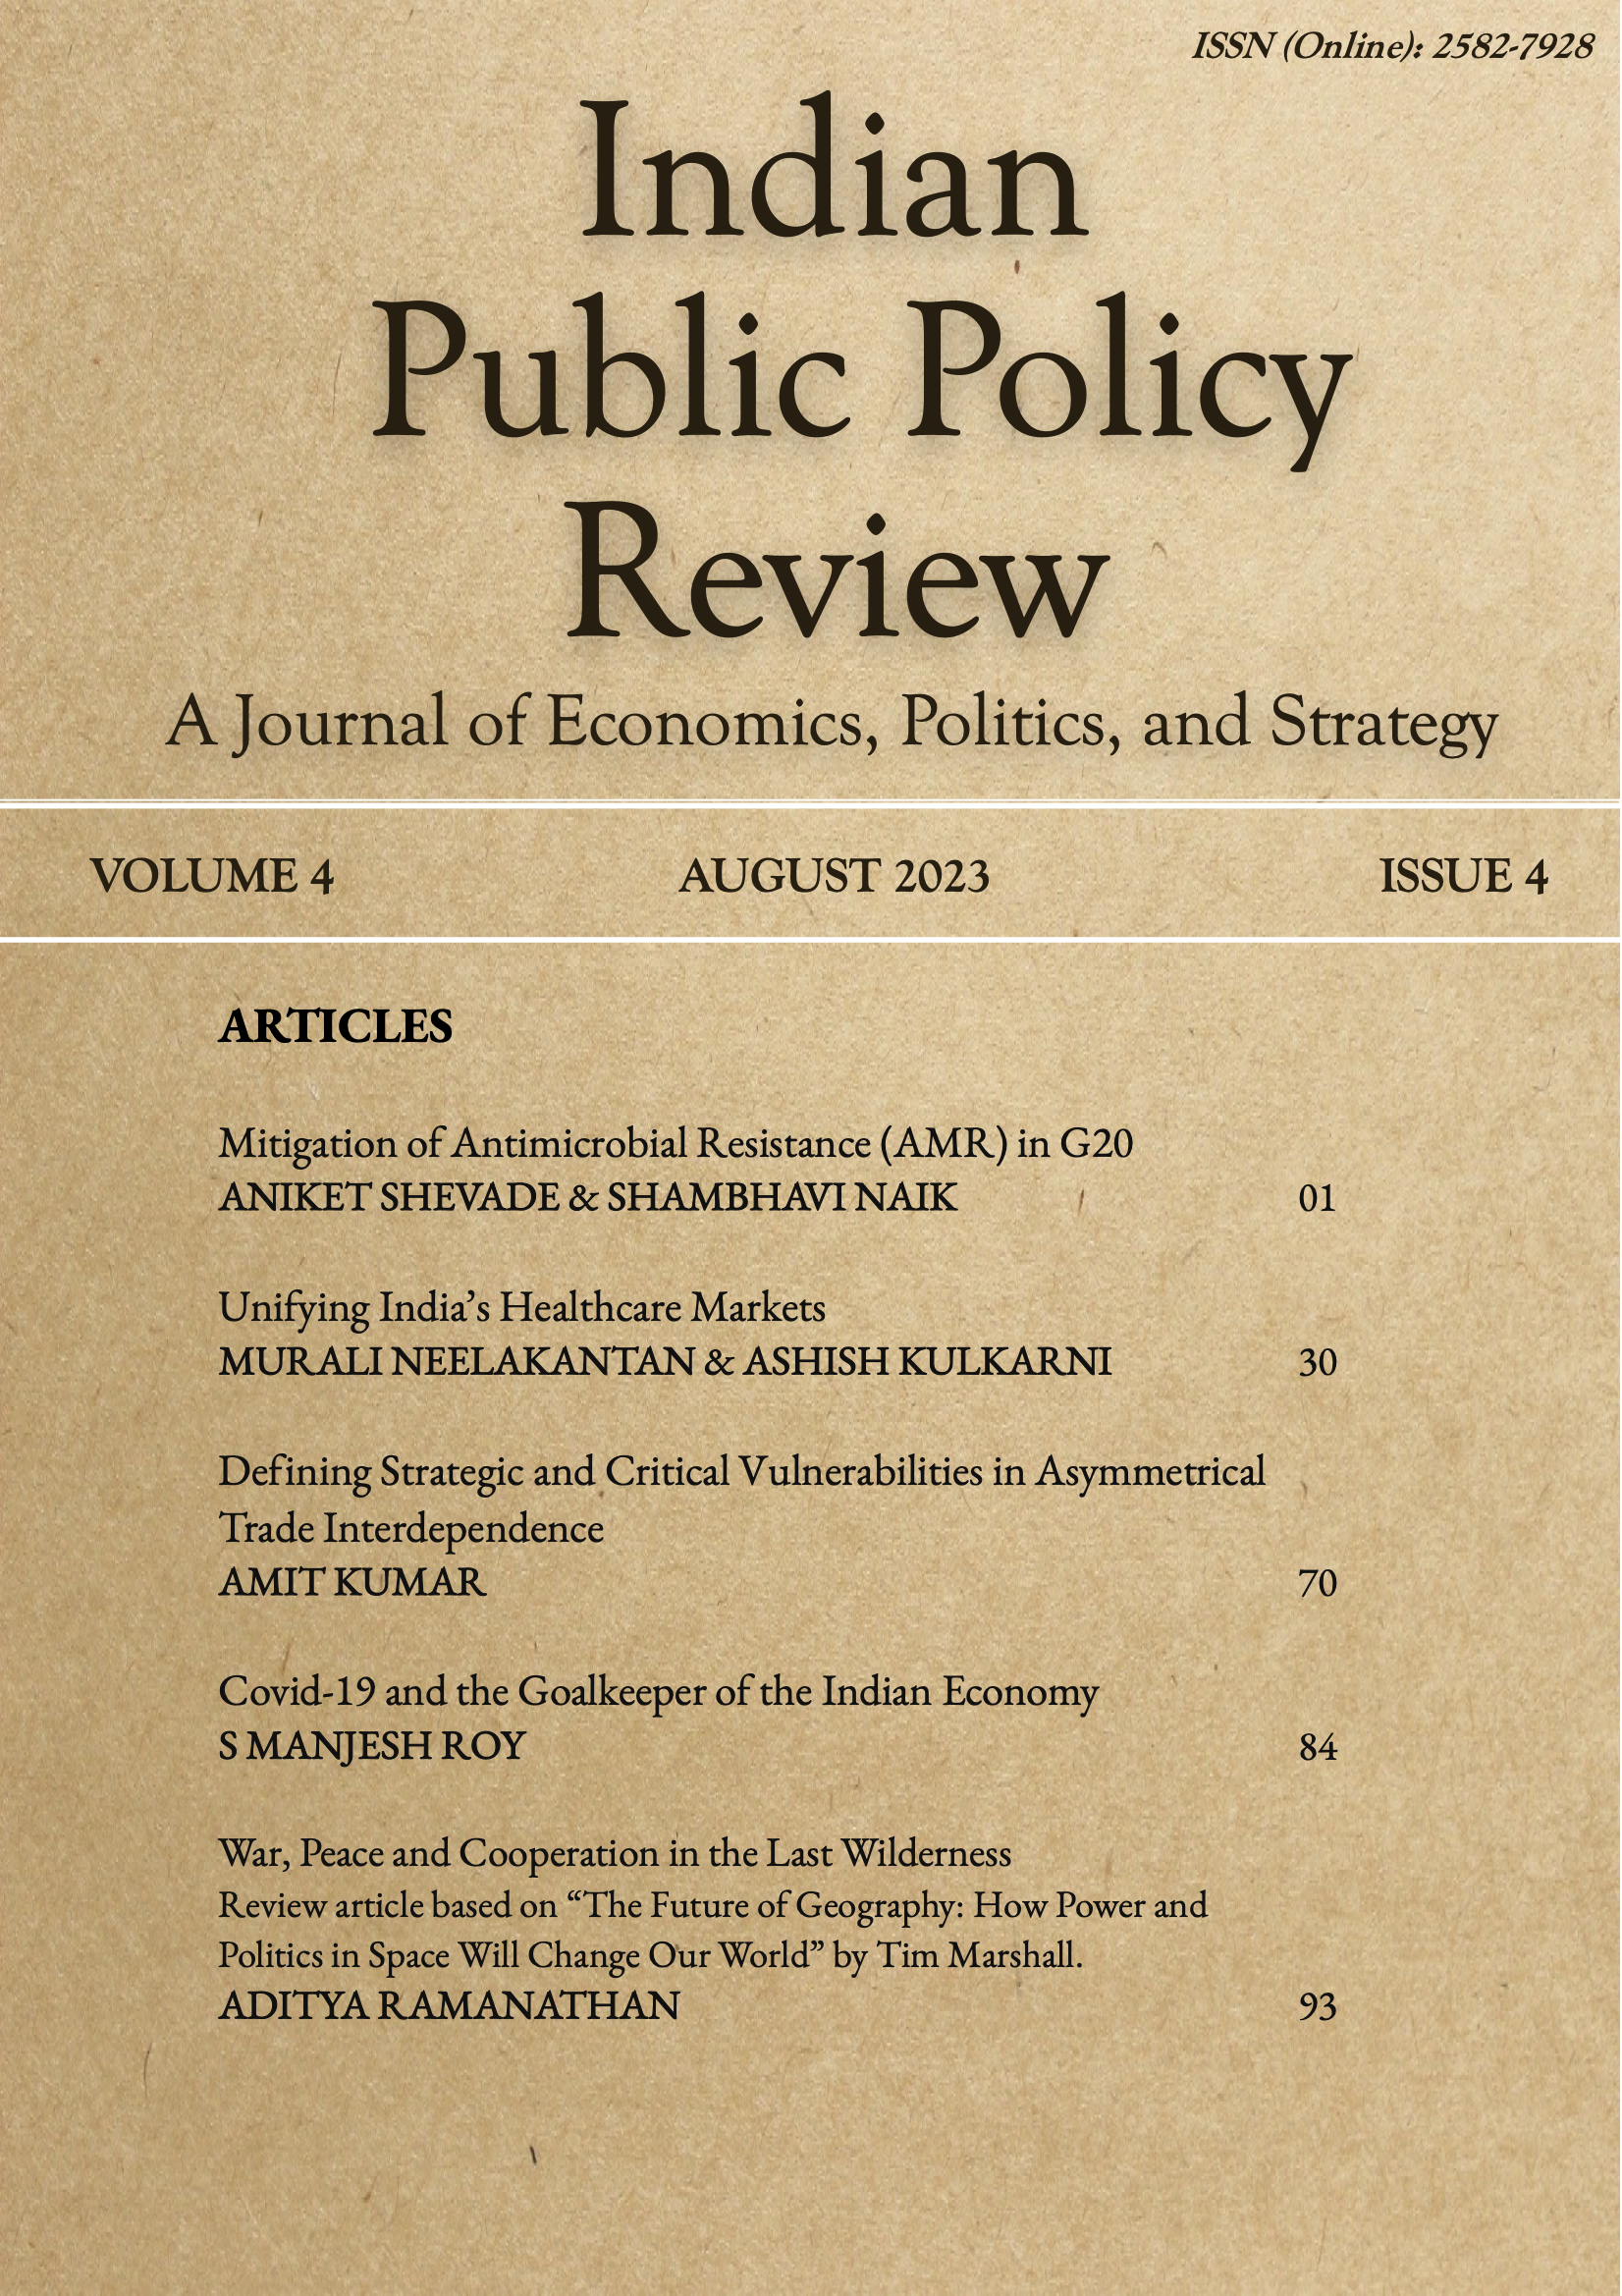 					View Vol. 4 No. 4 (Jul-Aug) (2023): Indian Public Policy Review
				